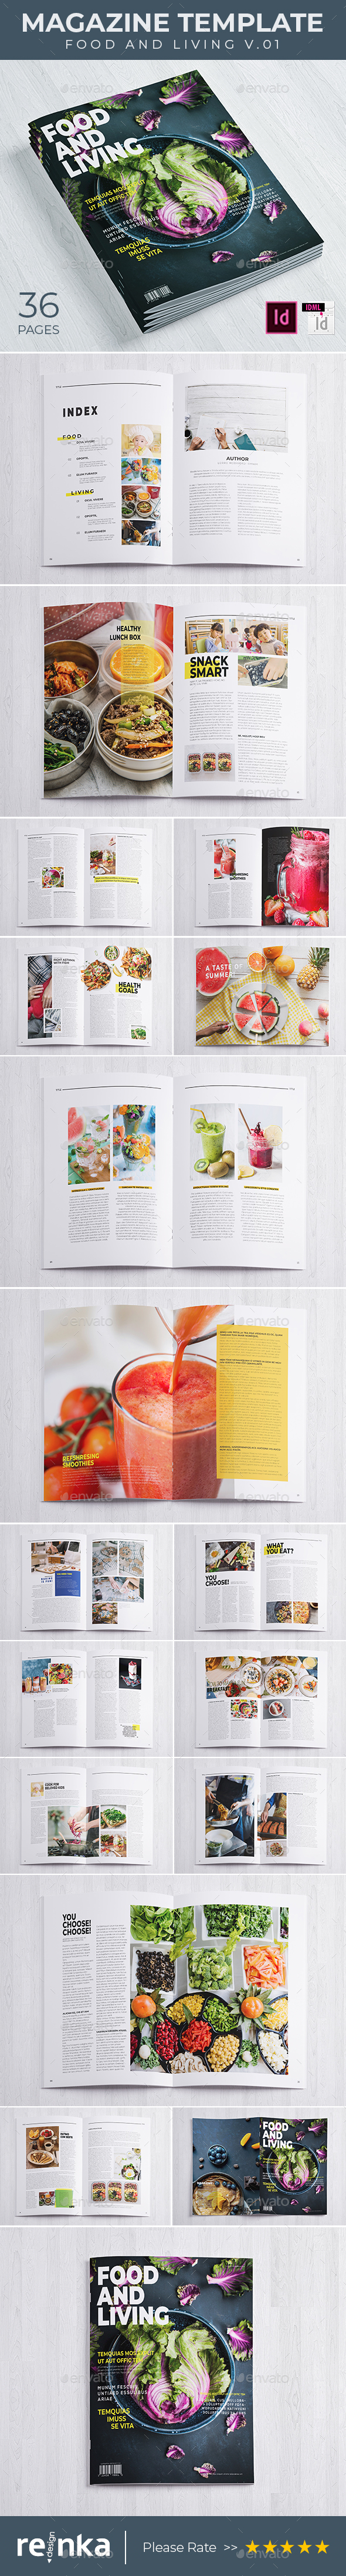 Magazine Template - Foods and Living